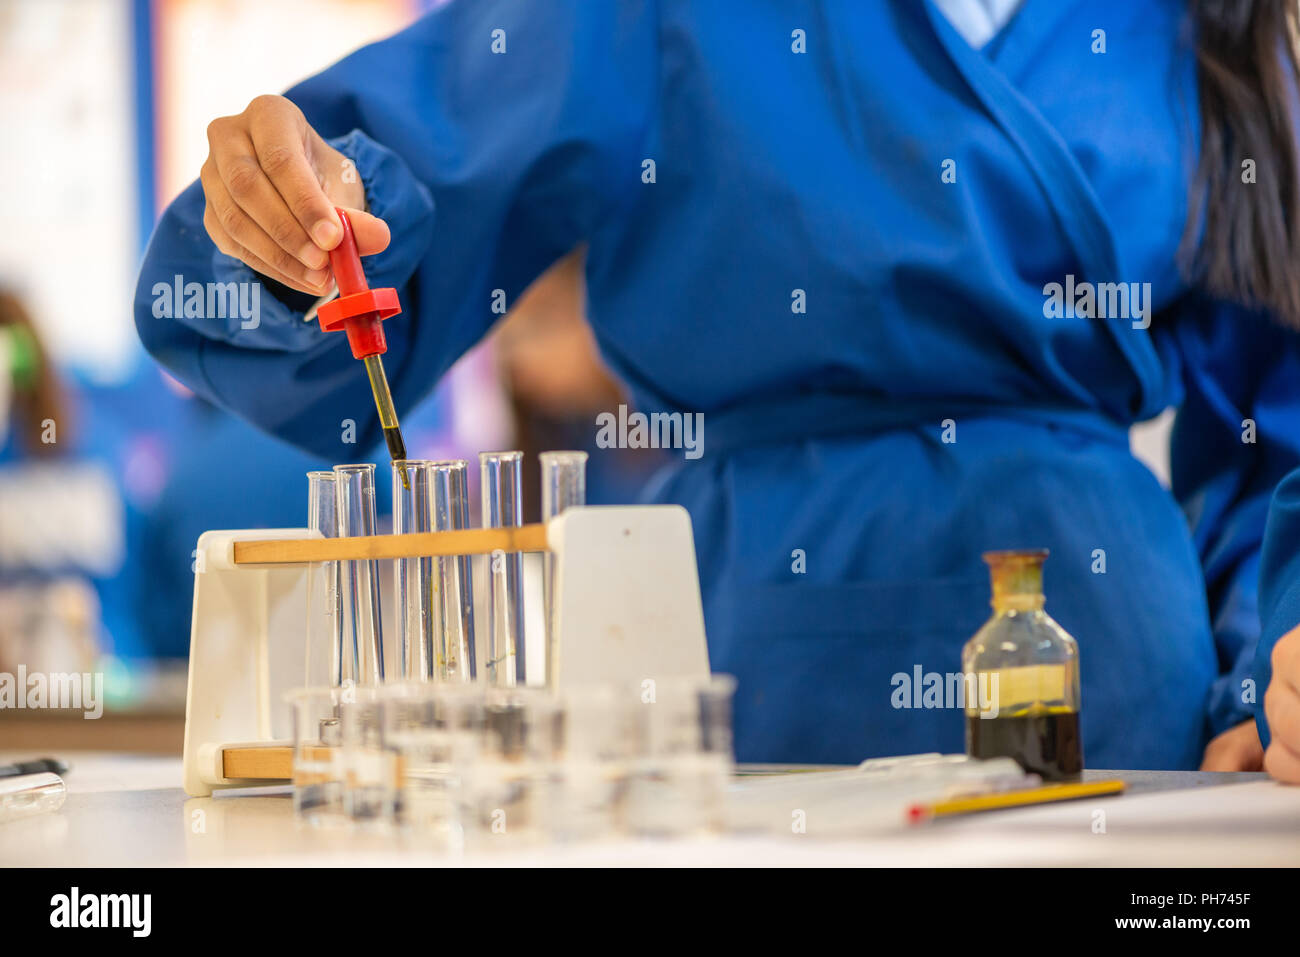 Coloured test tubes photographed in a school classroom during a science lesson and experiment. Stock Photo